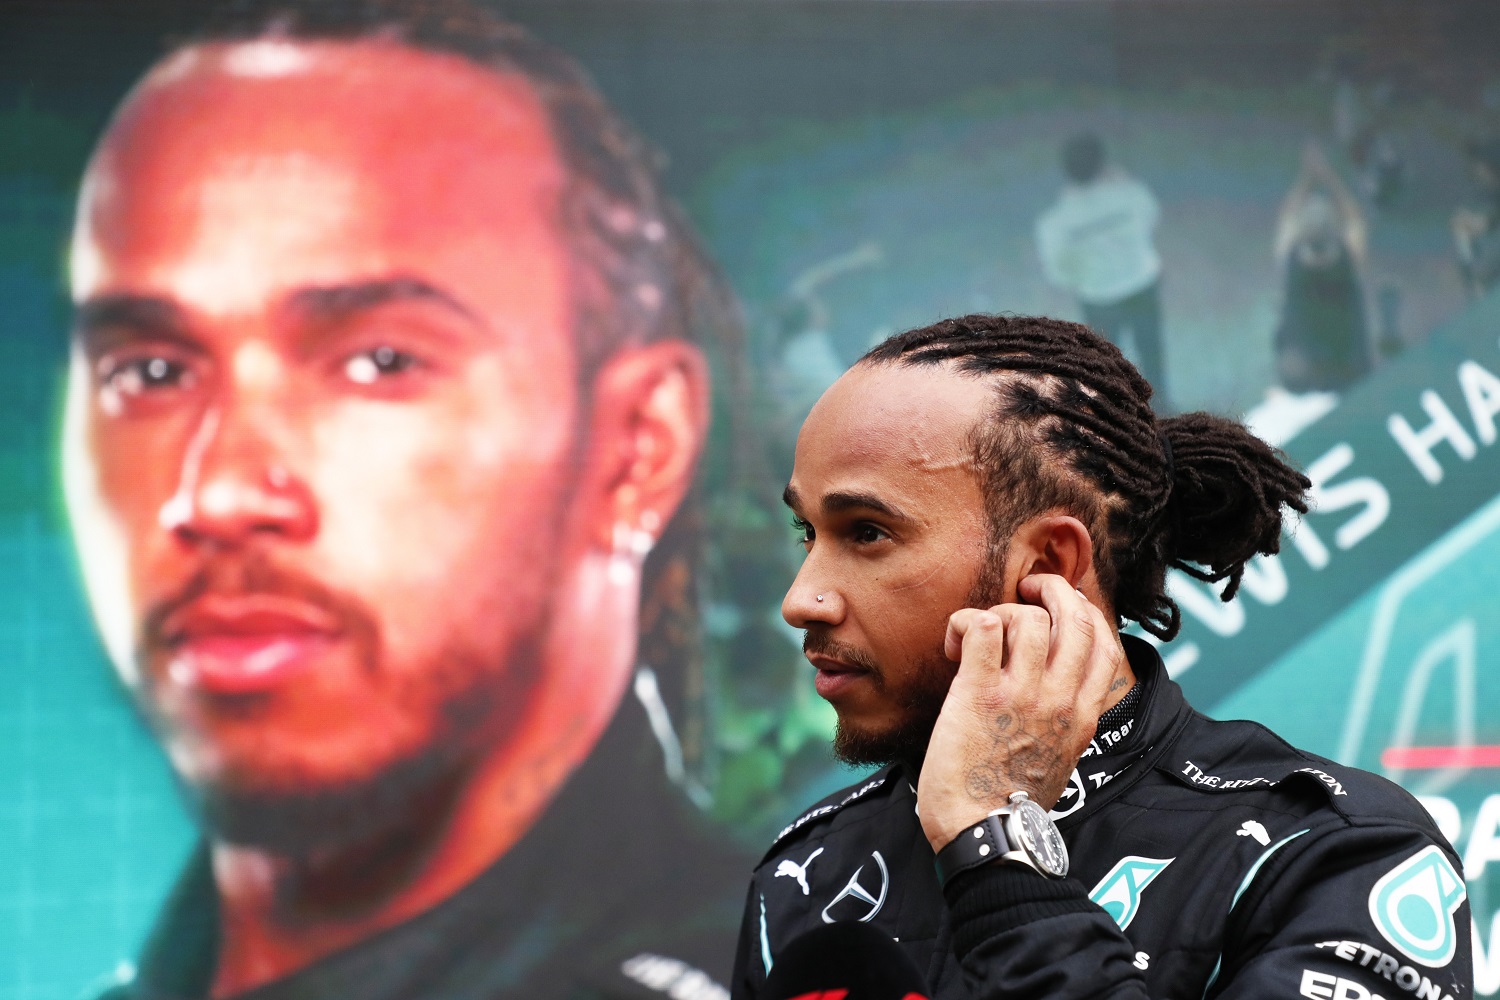 Race winner Lewis Hamilton of Great Britain and Mercedes GP looks on in parc ferme during the F1 Grand Prix of Russia at Sochi Autodrom on Sept. 26, 2021 in Sochi, Russia.